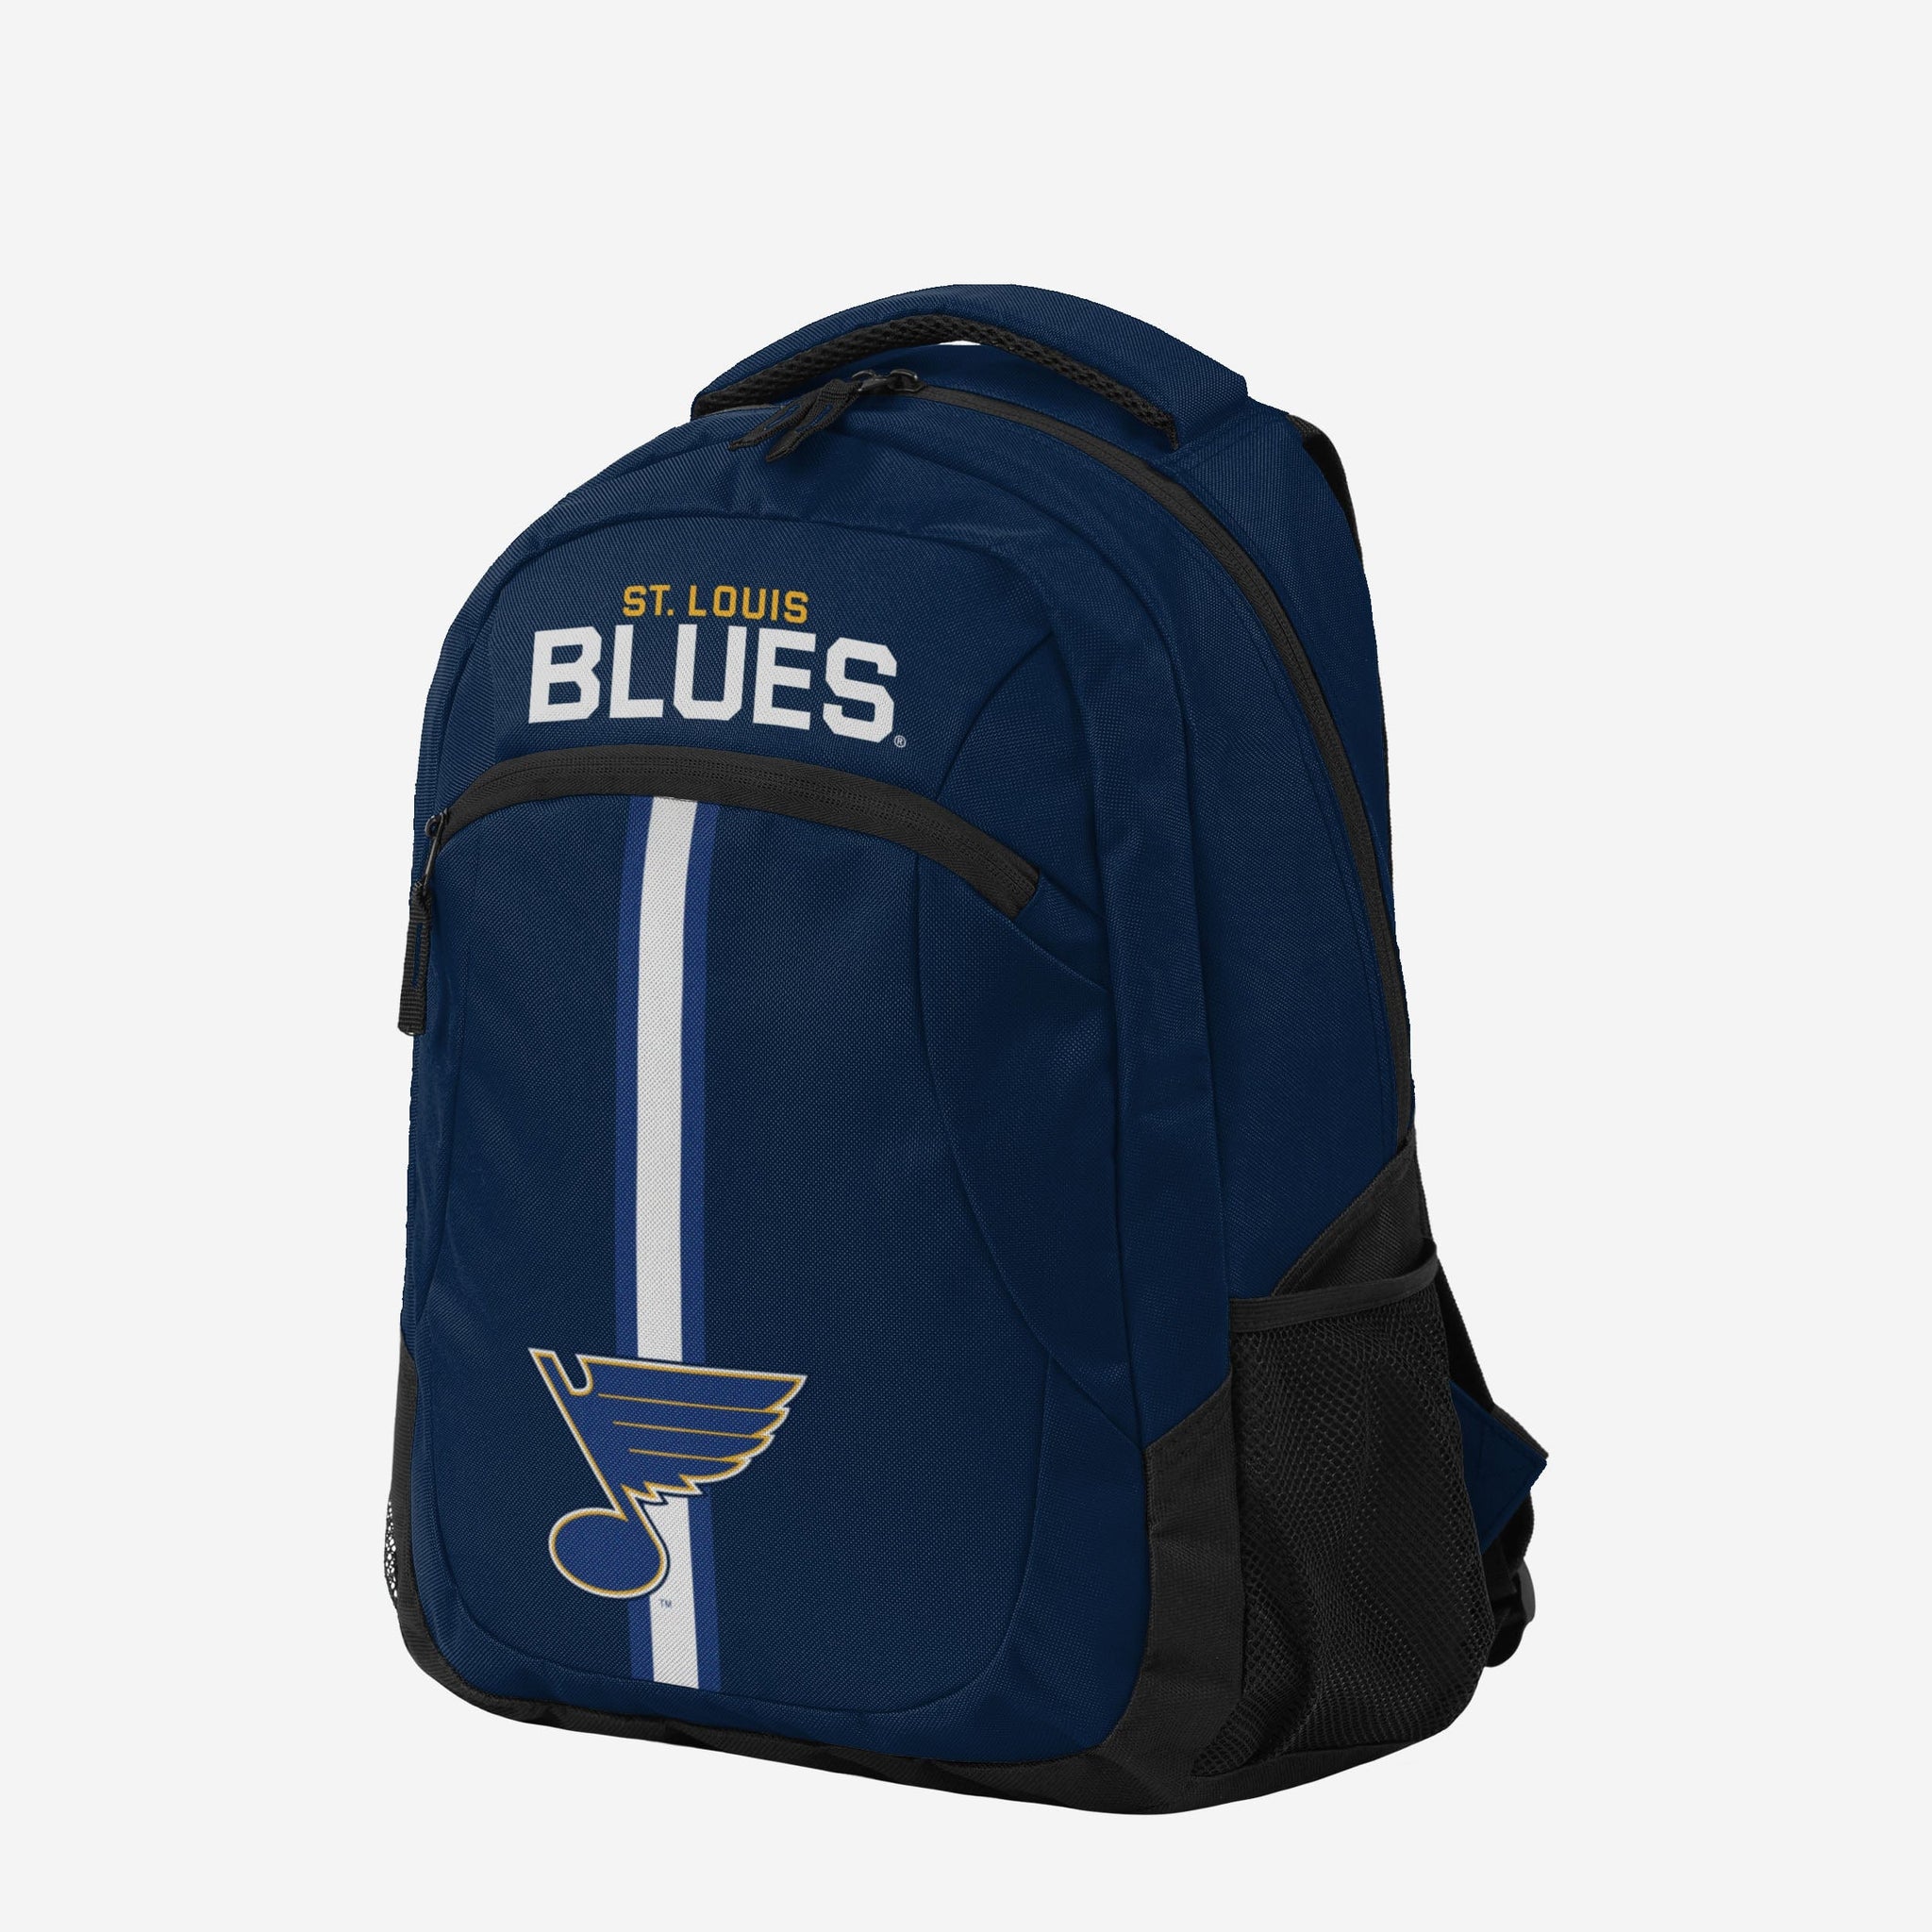 St. Louis Blues Bags, Blues Backpacks, Totes, Luggage, Duffel Bags